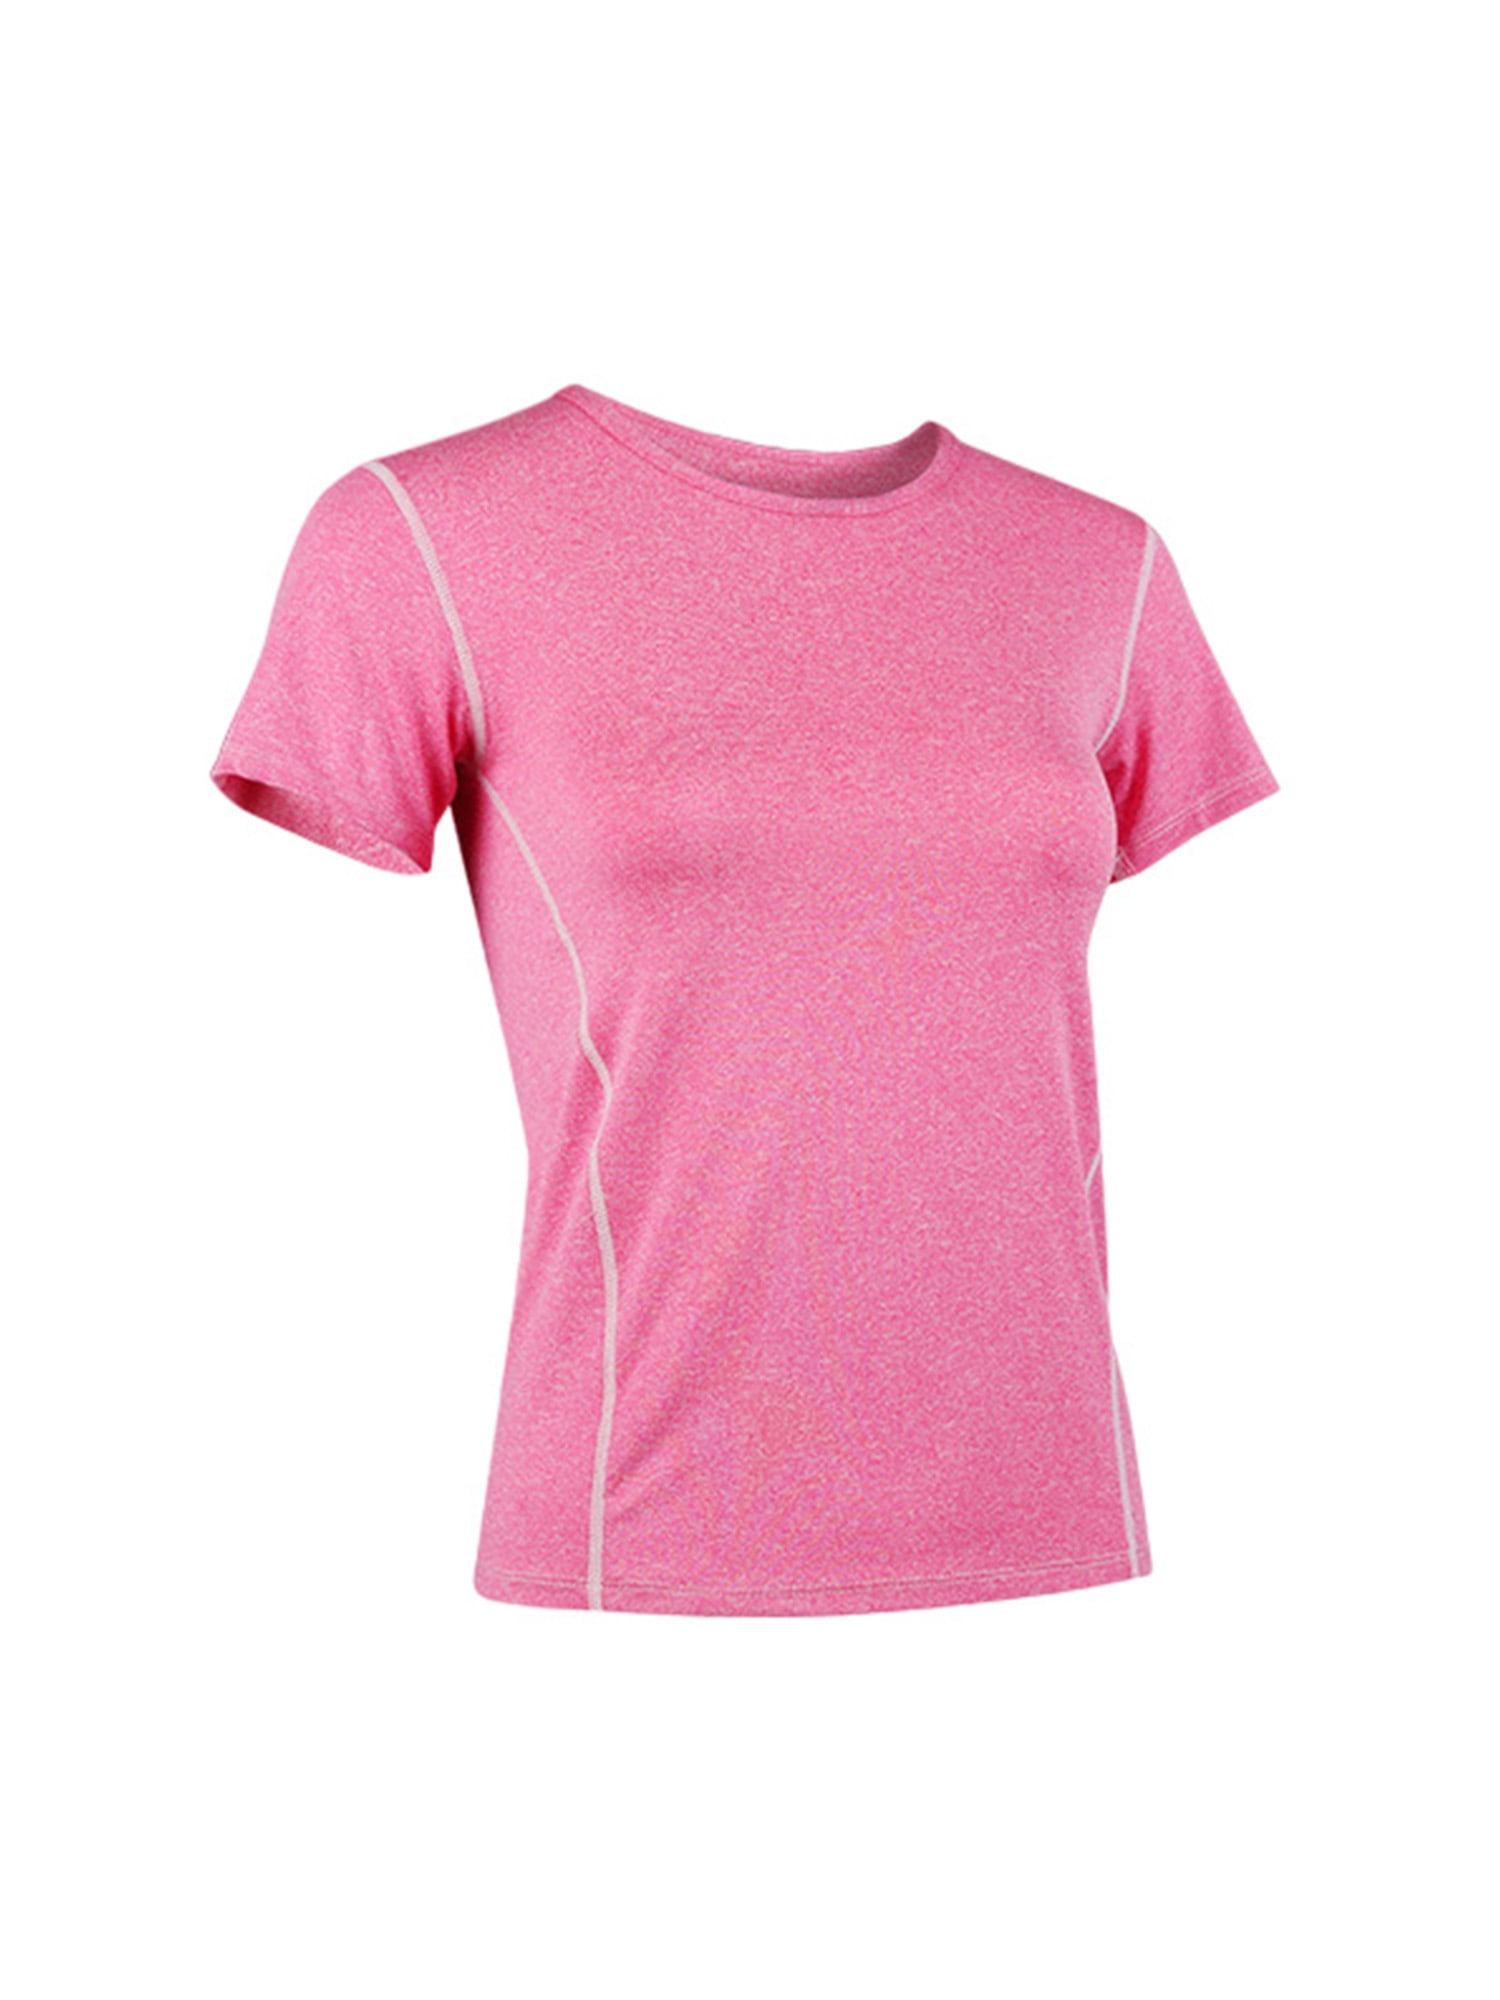 ACTIVE-DRY Plain Breathable Smooth Polyester Melange Sports Tee T-Shirt Tshirt 